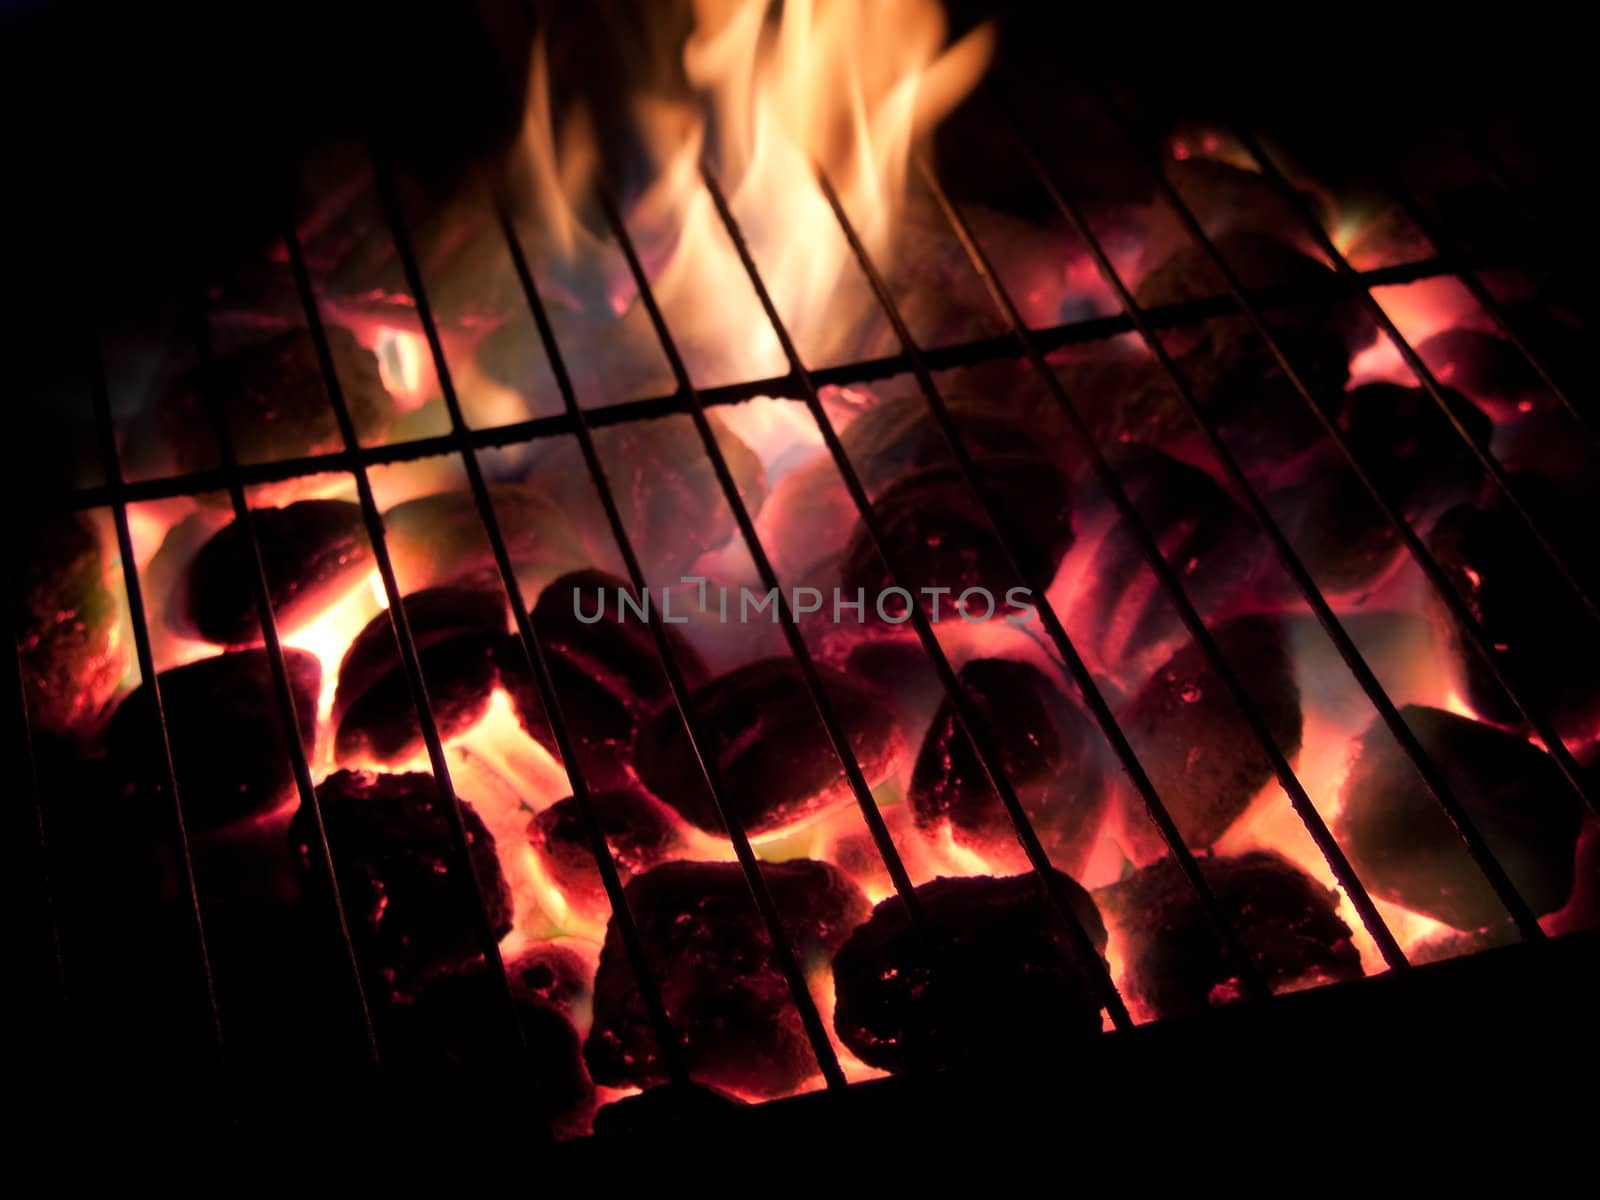 Long exposures of coals buring underneath a grill.